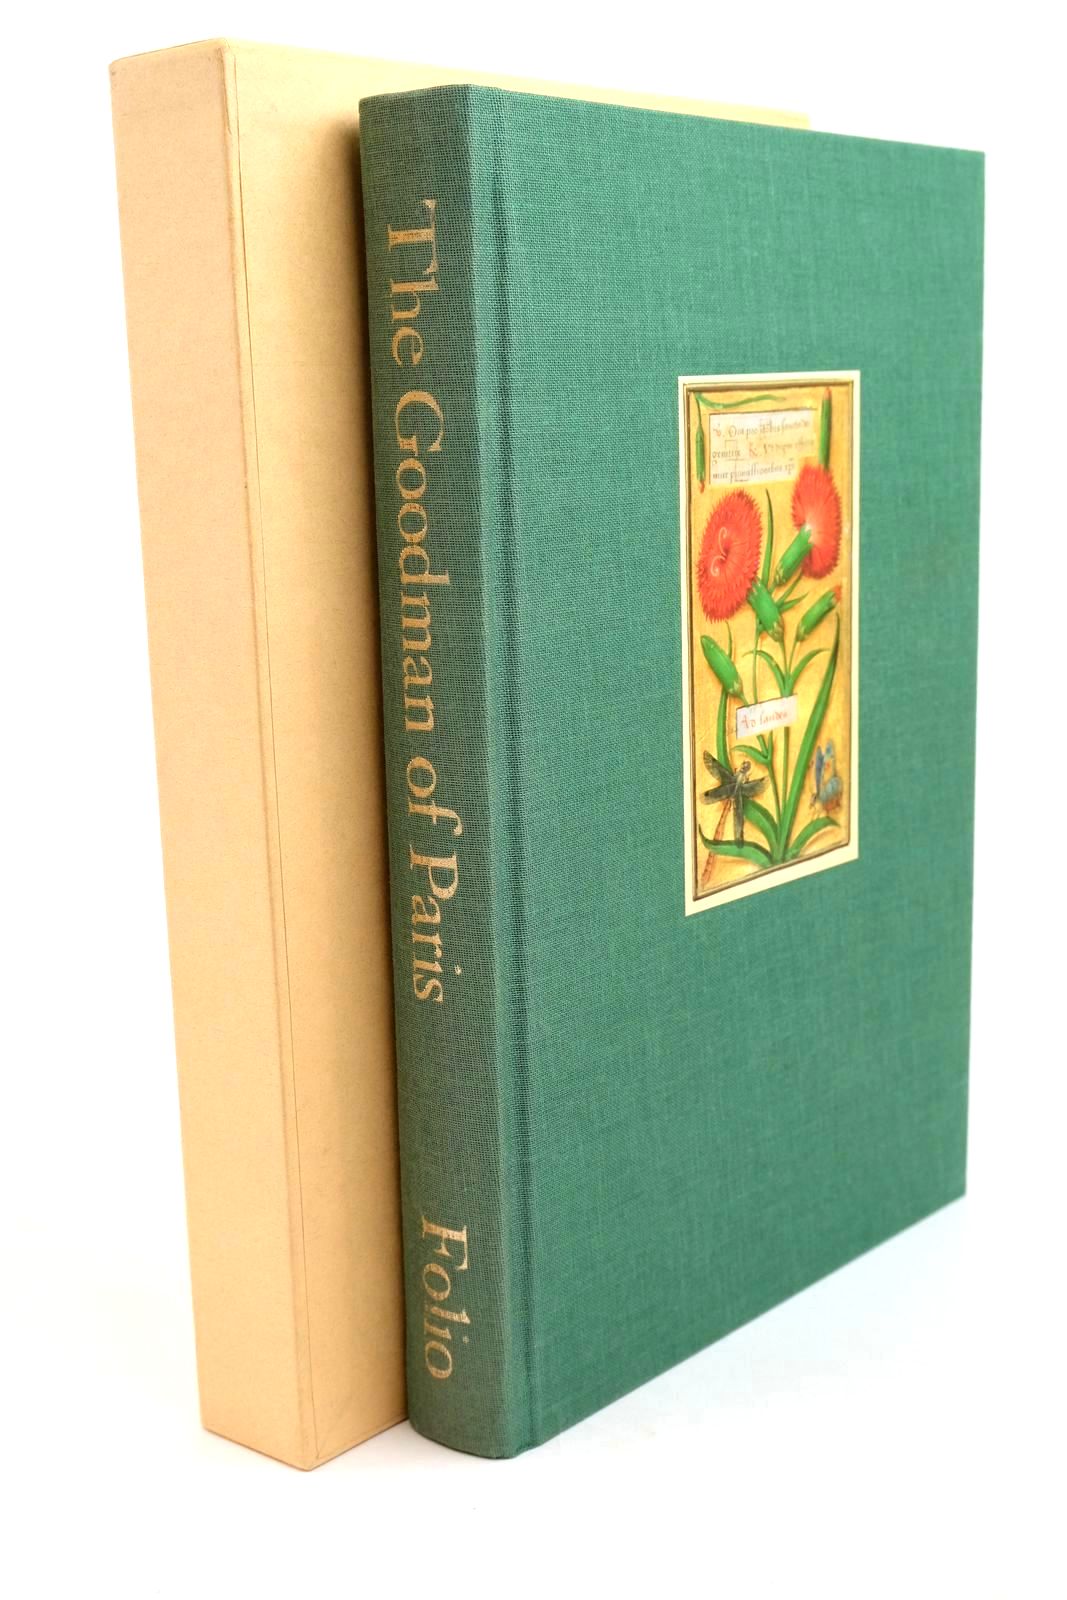 Photo of THE GOODMAN OF PARIS written by Power, Eileen published by Folio Society (STOCK CODE: 1321366)  for sale by Stella & Rose's Books